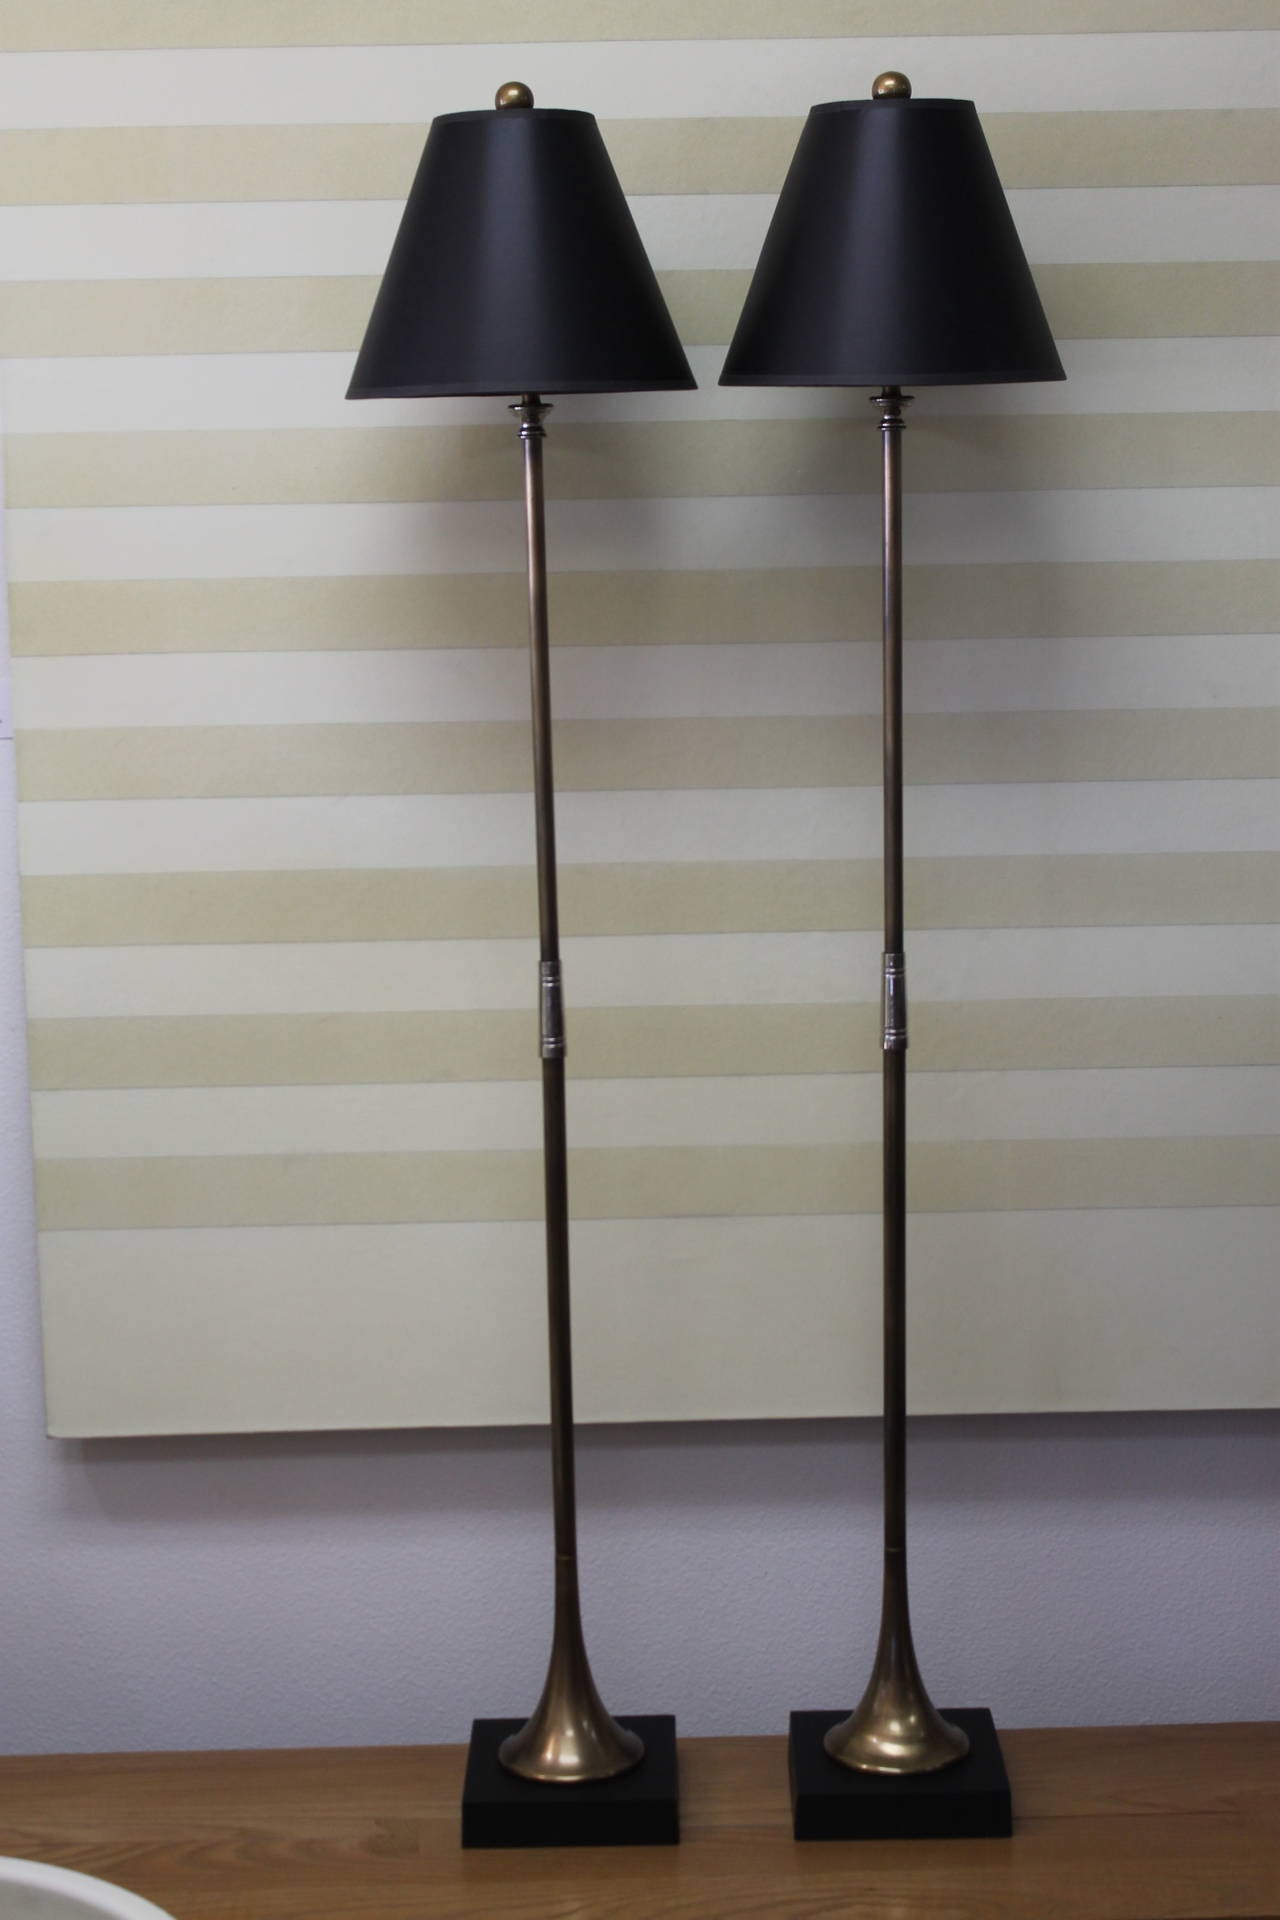 Pair of Chapman trumpet floor lamps. Signed and dated 1972.  Base measures 7" square and 1.75" high.  Trumpet portion measures 44.5" high.  Overall height from base to the top of finial is 56".  Lamp shades are included.